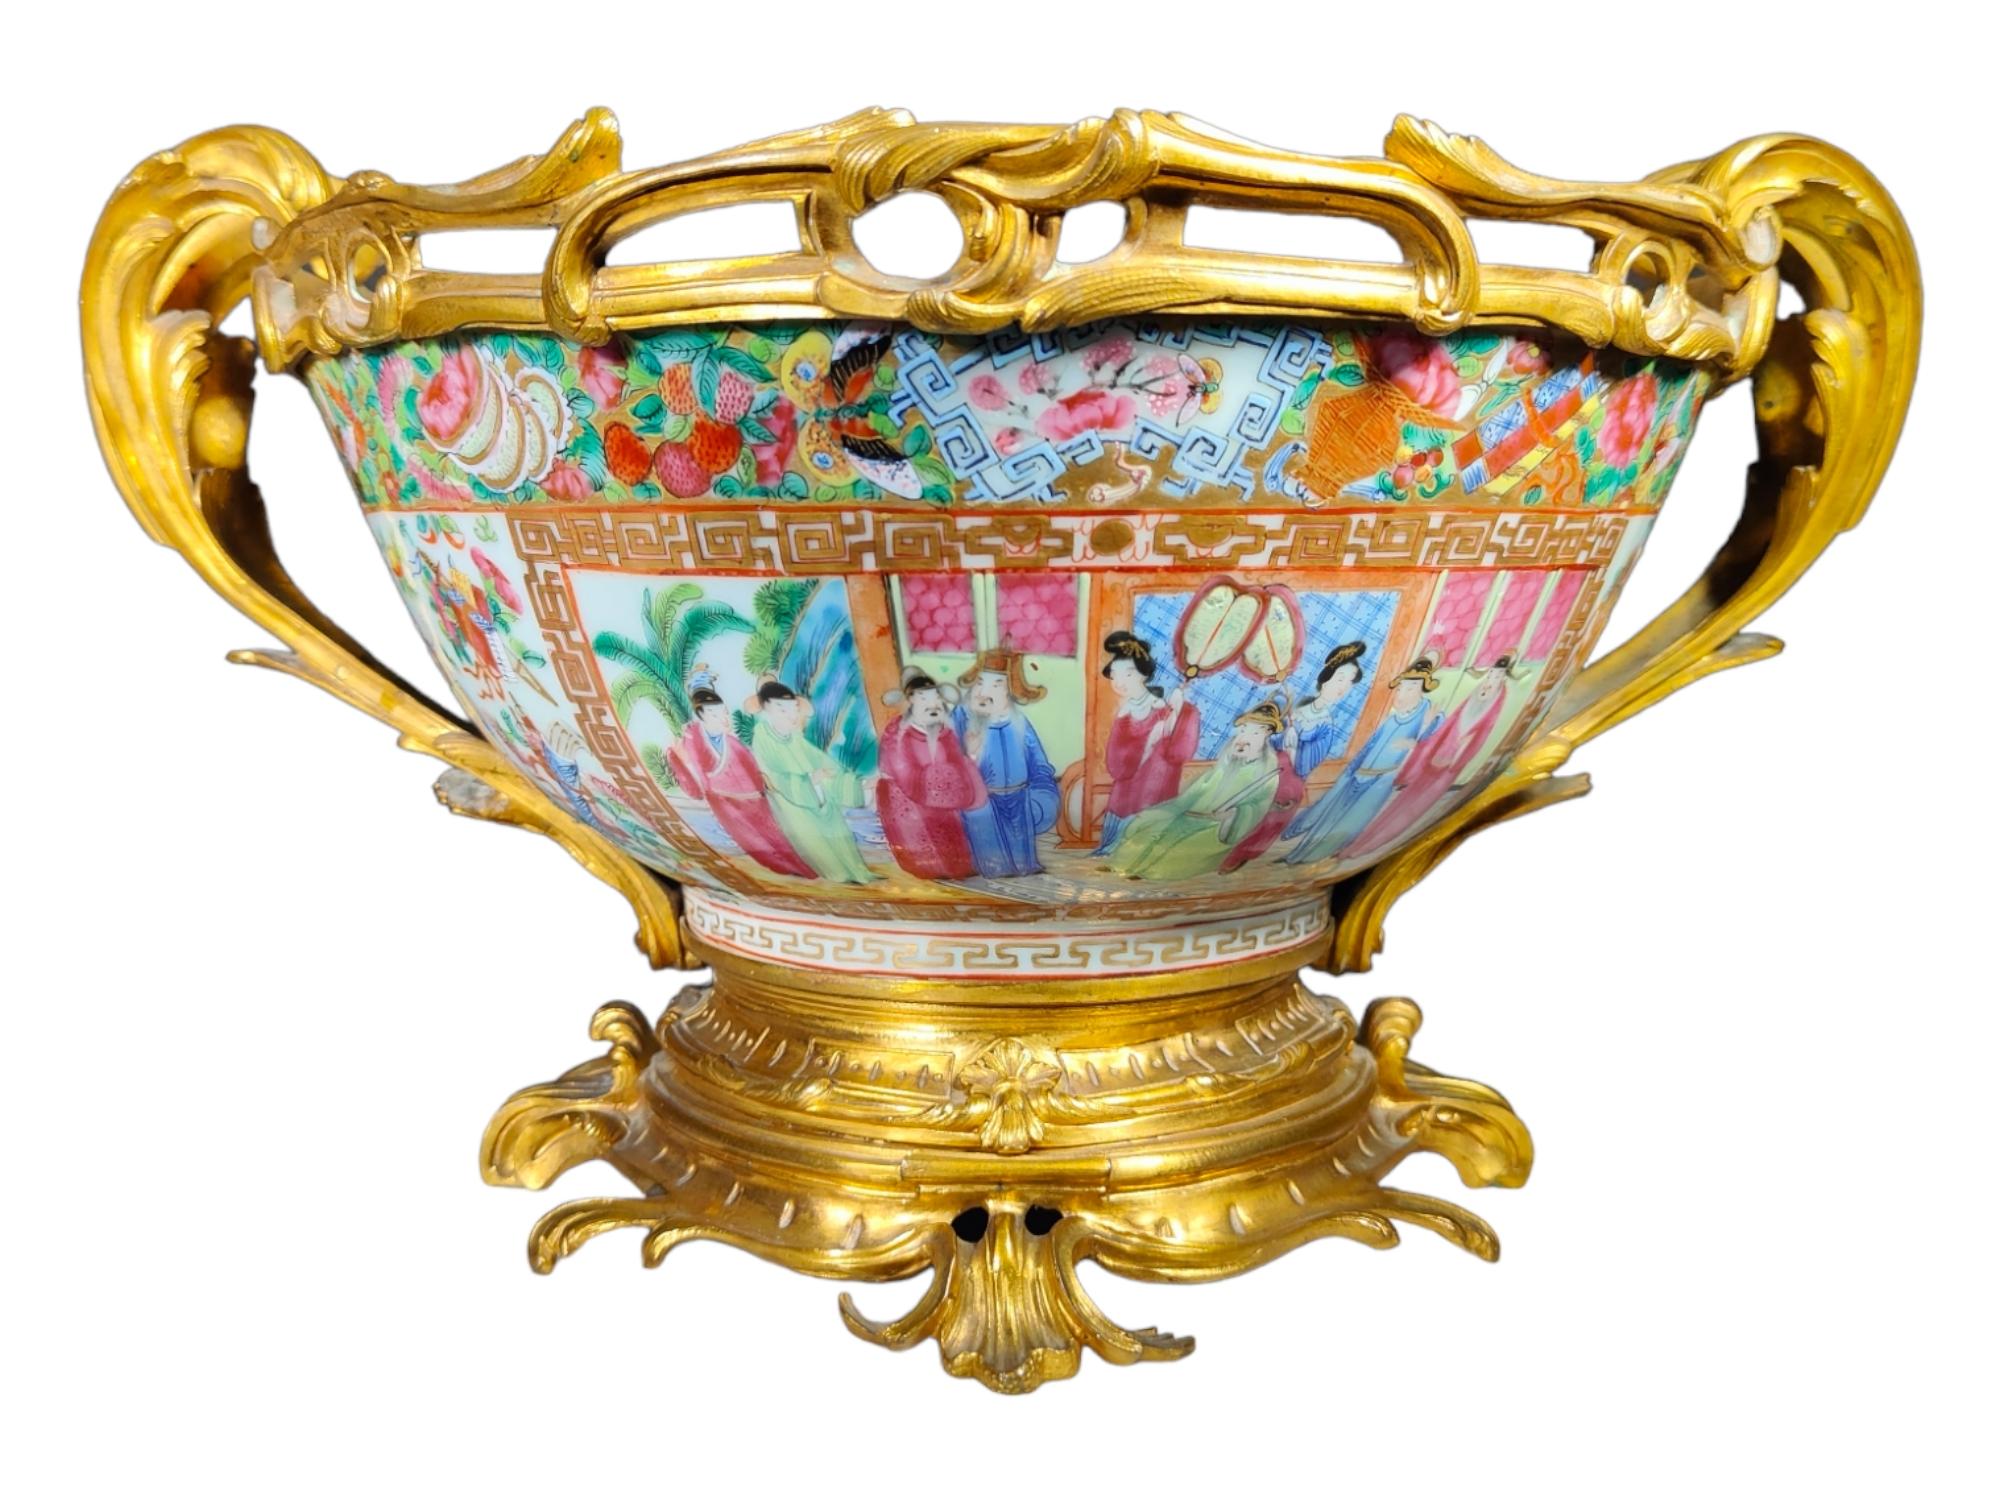 19th Century Chinese Rose Medallion Ormolu Mounted Centerpiece Bowl
CHINESE ROSE MEDALLION PUNCH BOWL WITH FRENCH GILT-BRONZE MOUNTS, PORCELAIN XIX TH, gilded bronze mounts, the large circular bowl gaily decorated with figures at leisure in a